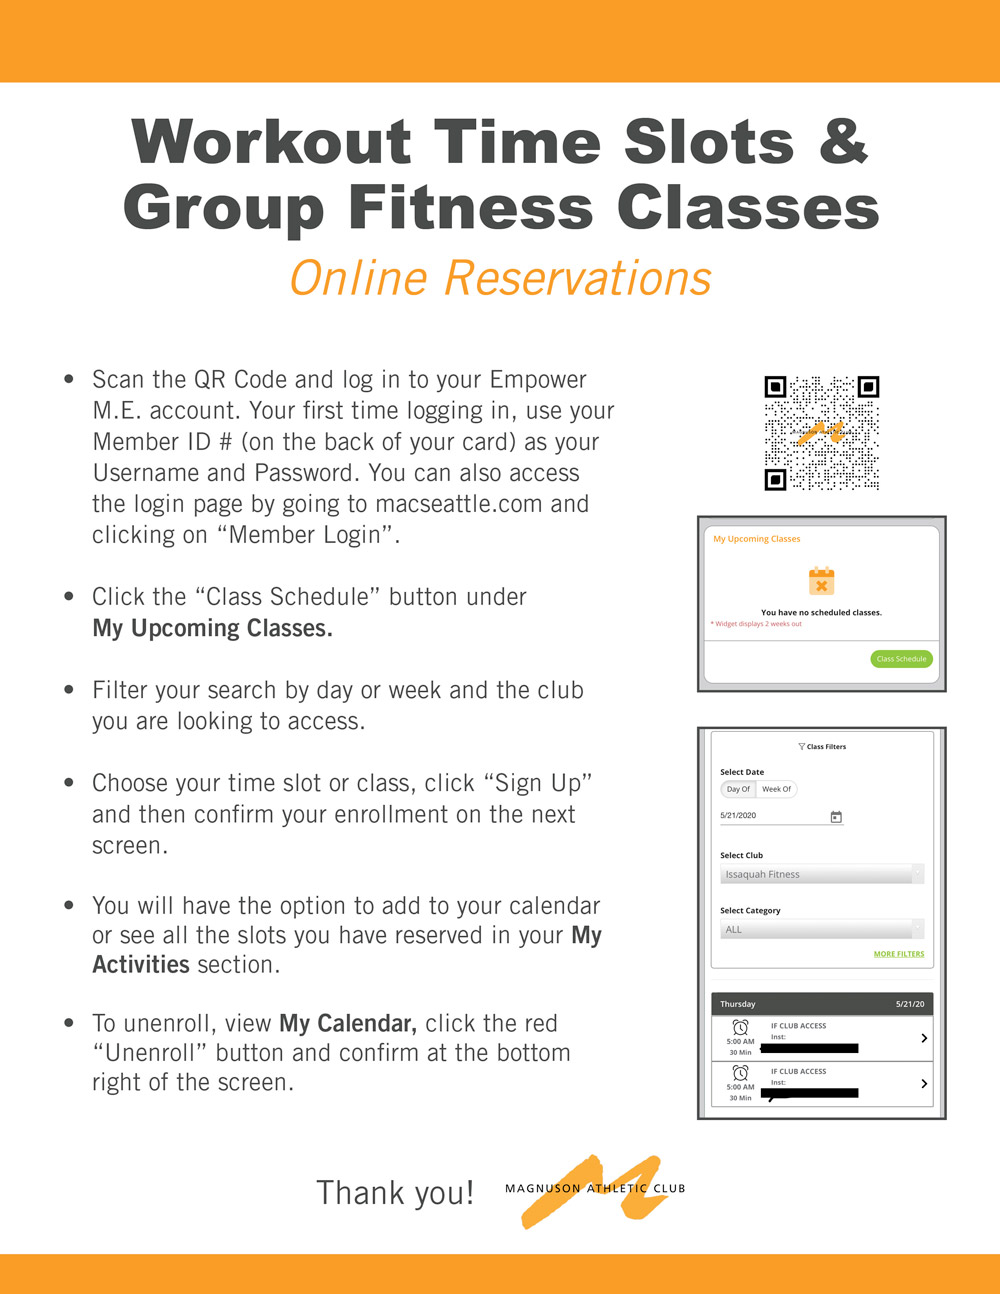 How to reserve a workout time slot or group fitness class online